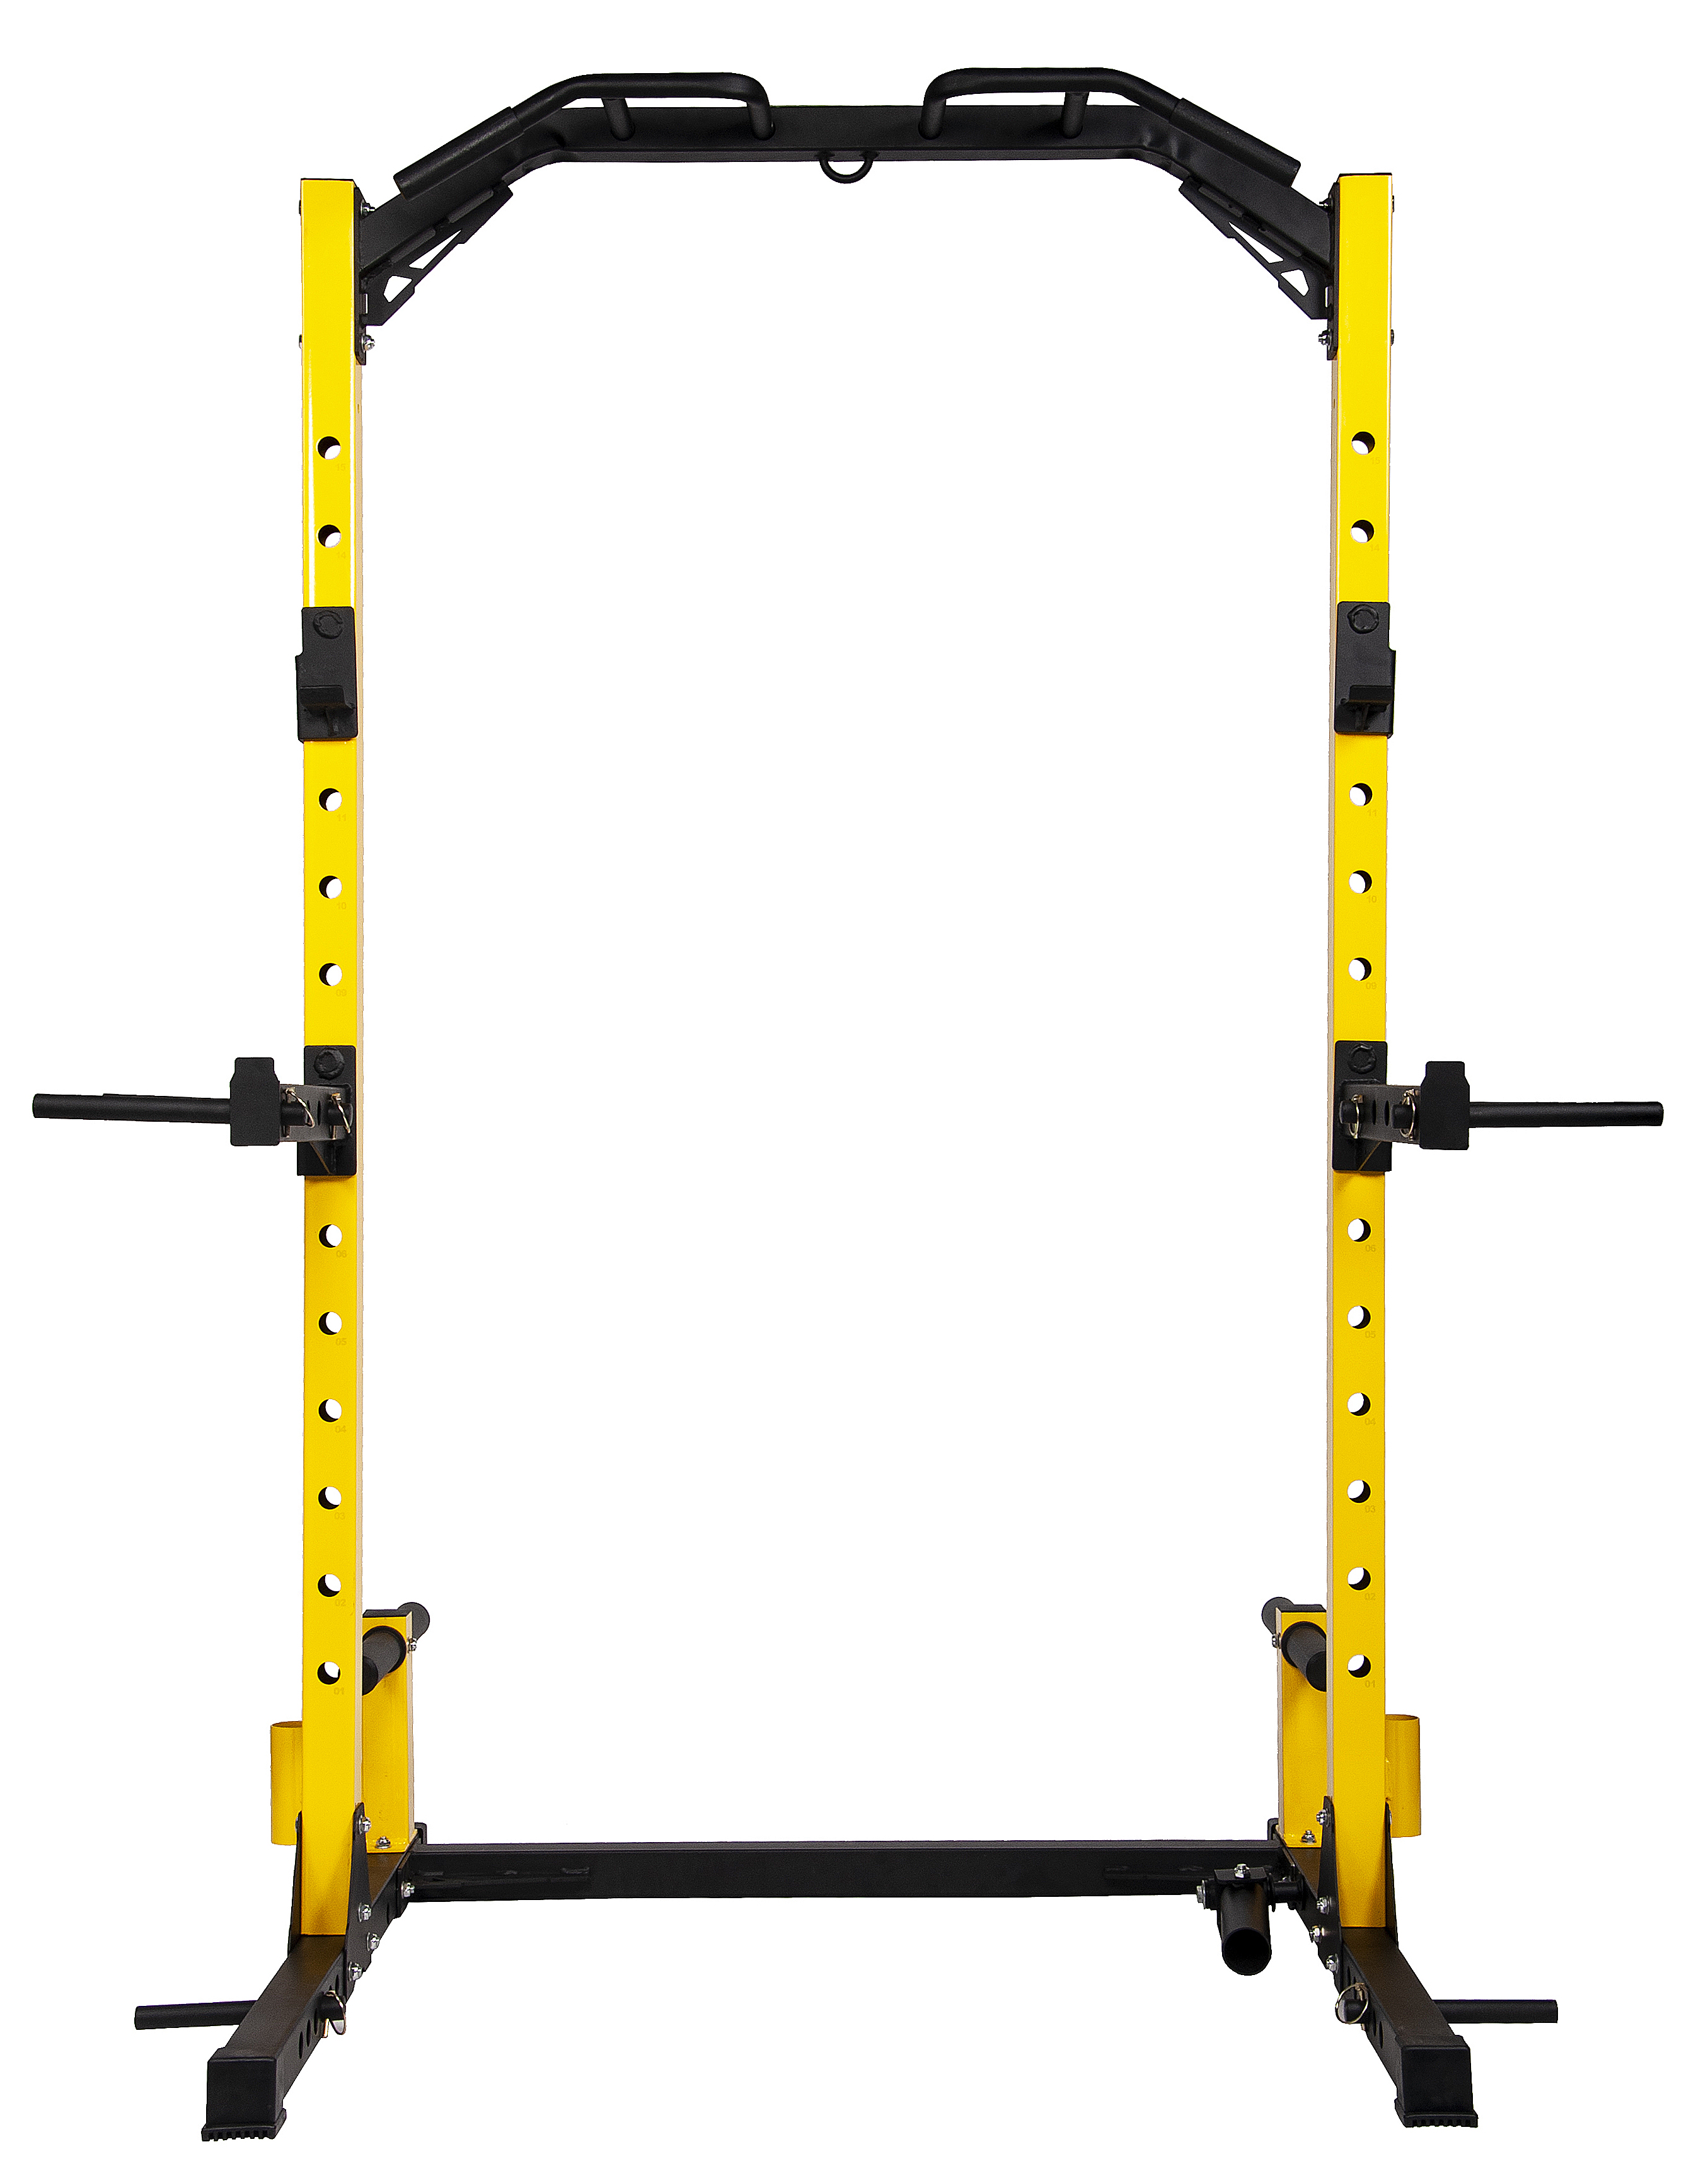 BalanceFrom 1000-Pound Capacity Multi-Function Adjustable Power Rack Squat Stand with Safety Spotter Arms, Dip Bars, Weight Plate Holders, Barbell Holders and Landmine Attachment - image 2 of 8